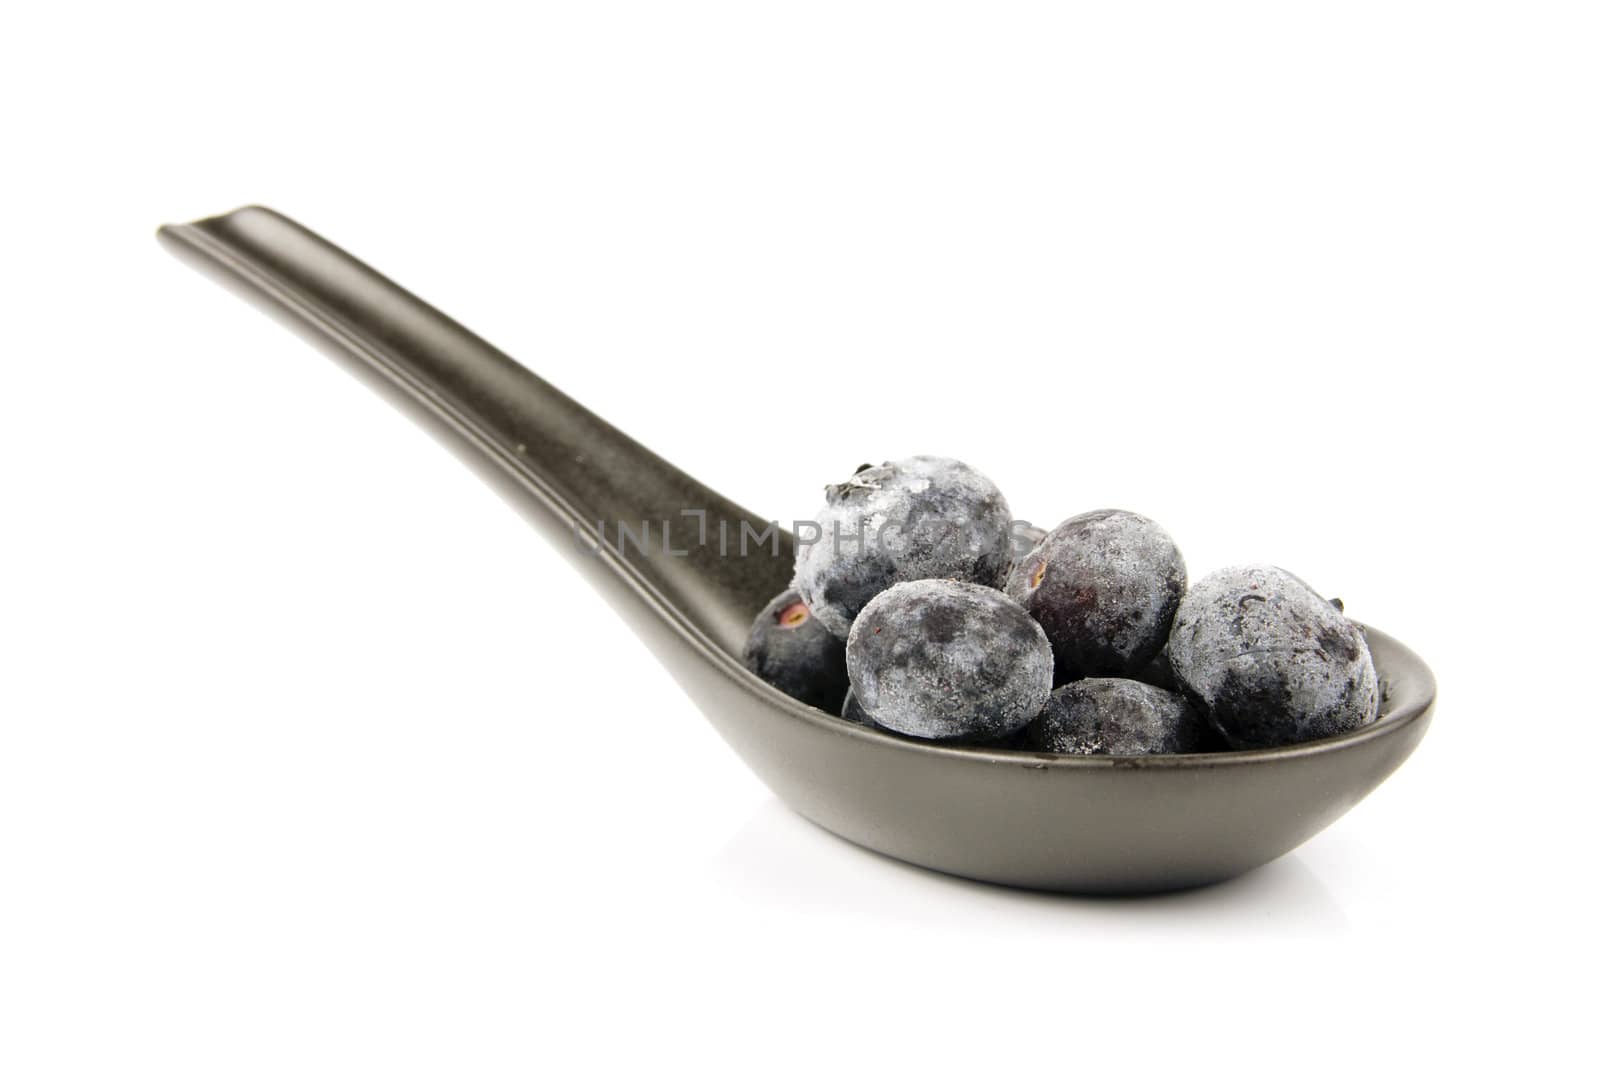 Blue ripe blueberries on s amll black spoon with a reflective white background